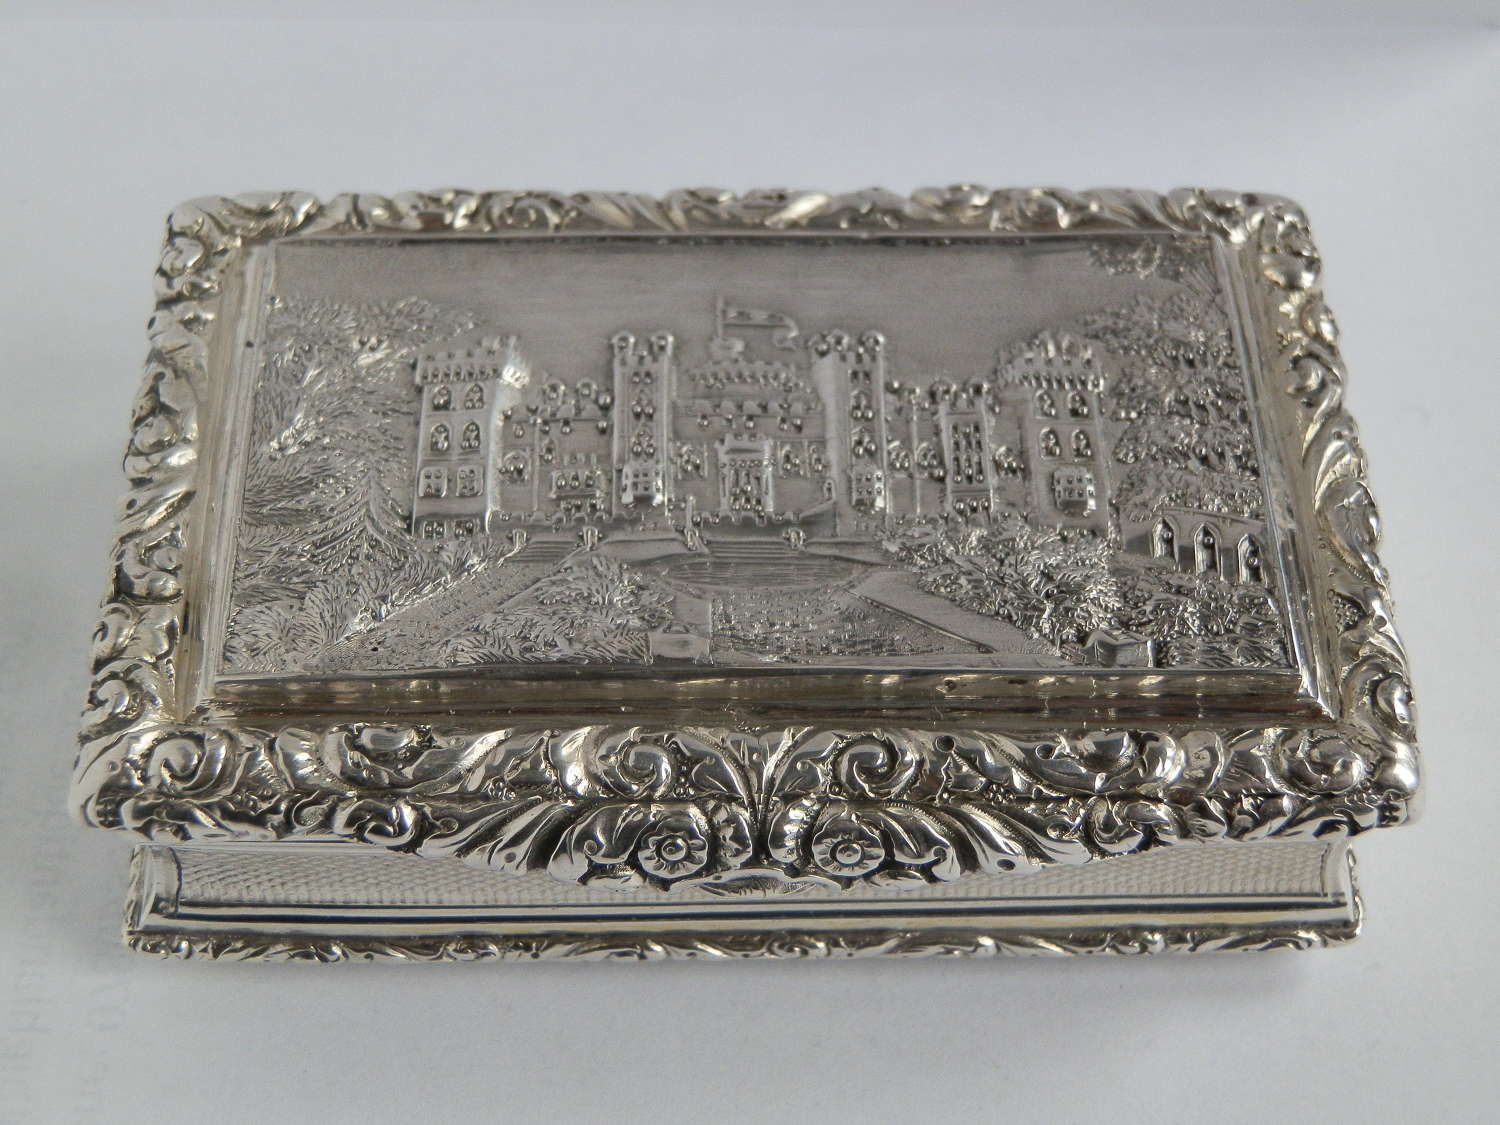 George IV Windsor Castle snuff box, Taylor & Perry, 1823